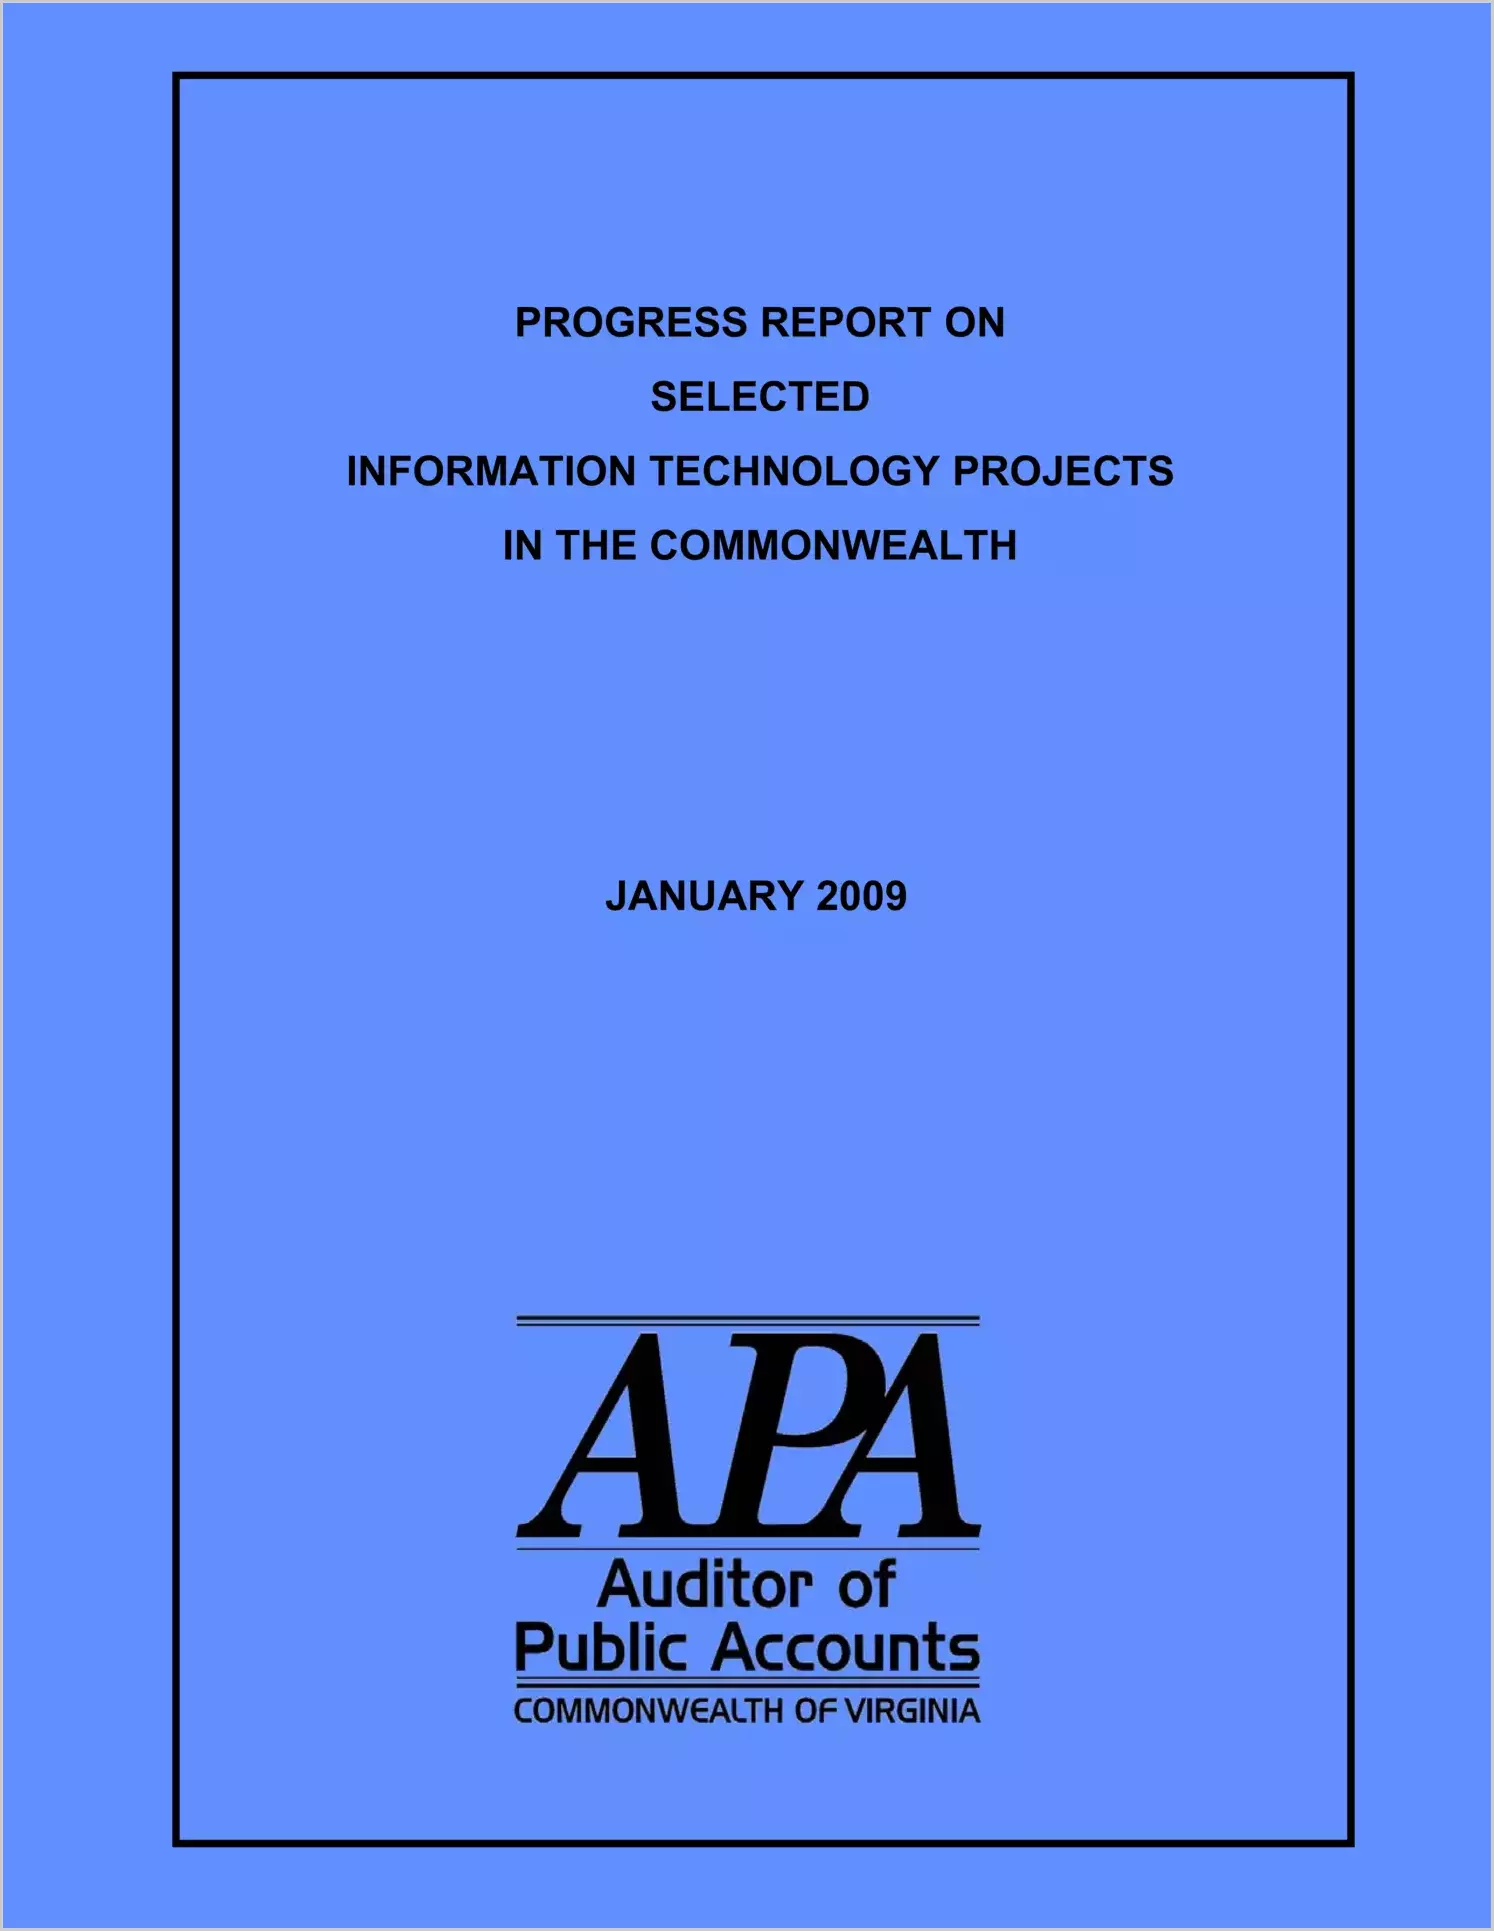 Progress Report on Selected Information Technology Projects in the Commonwealth January 2009